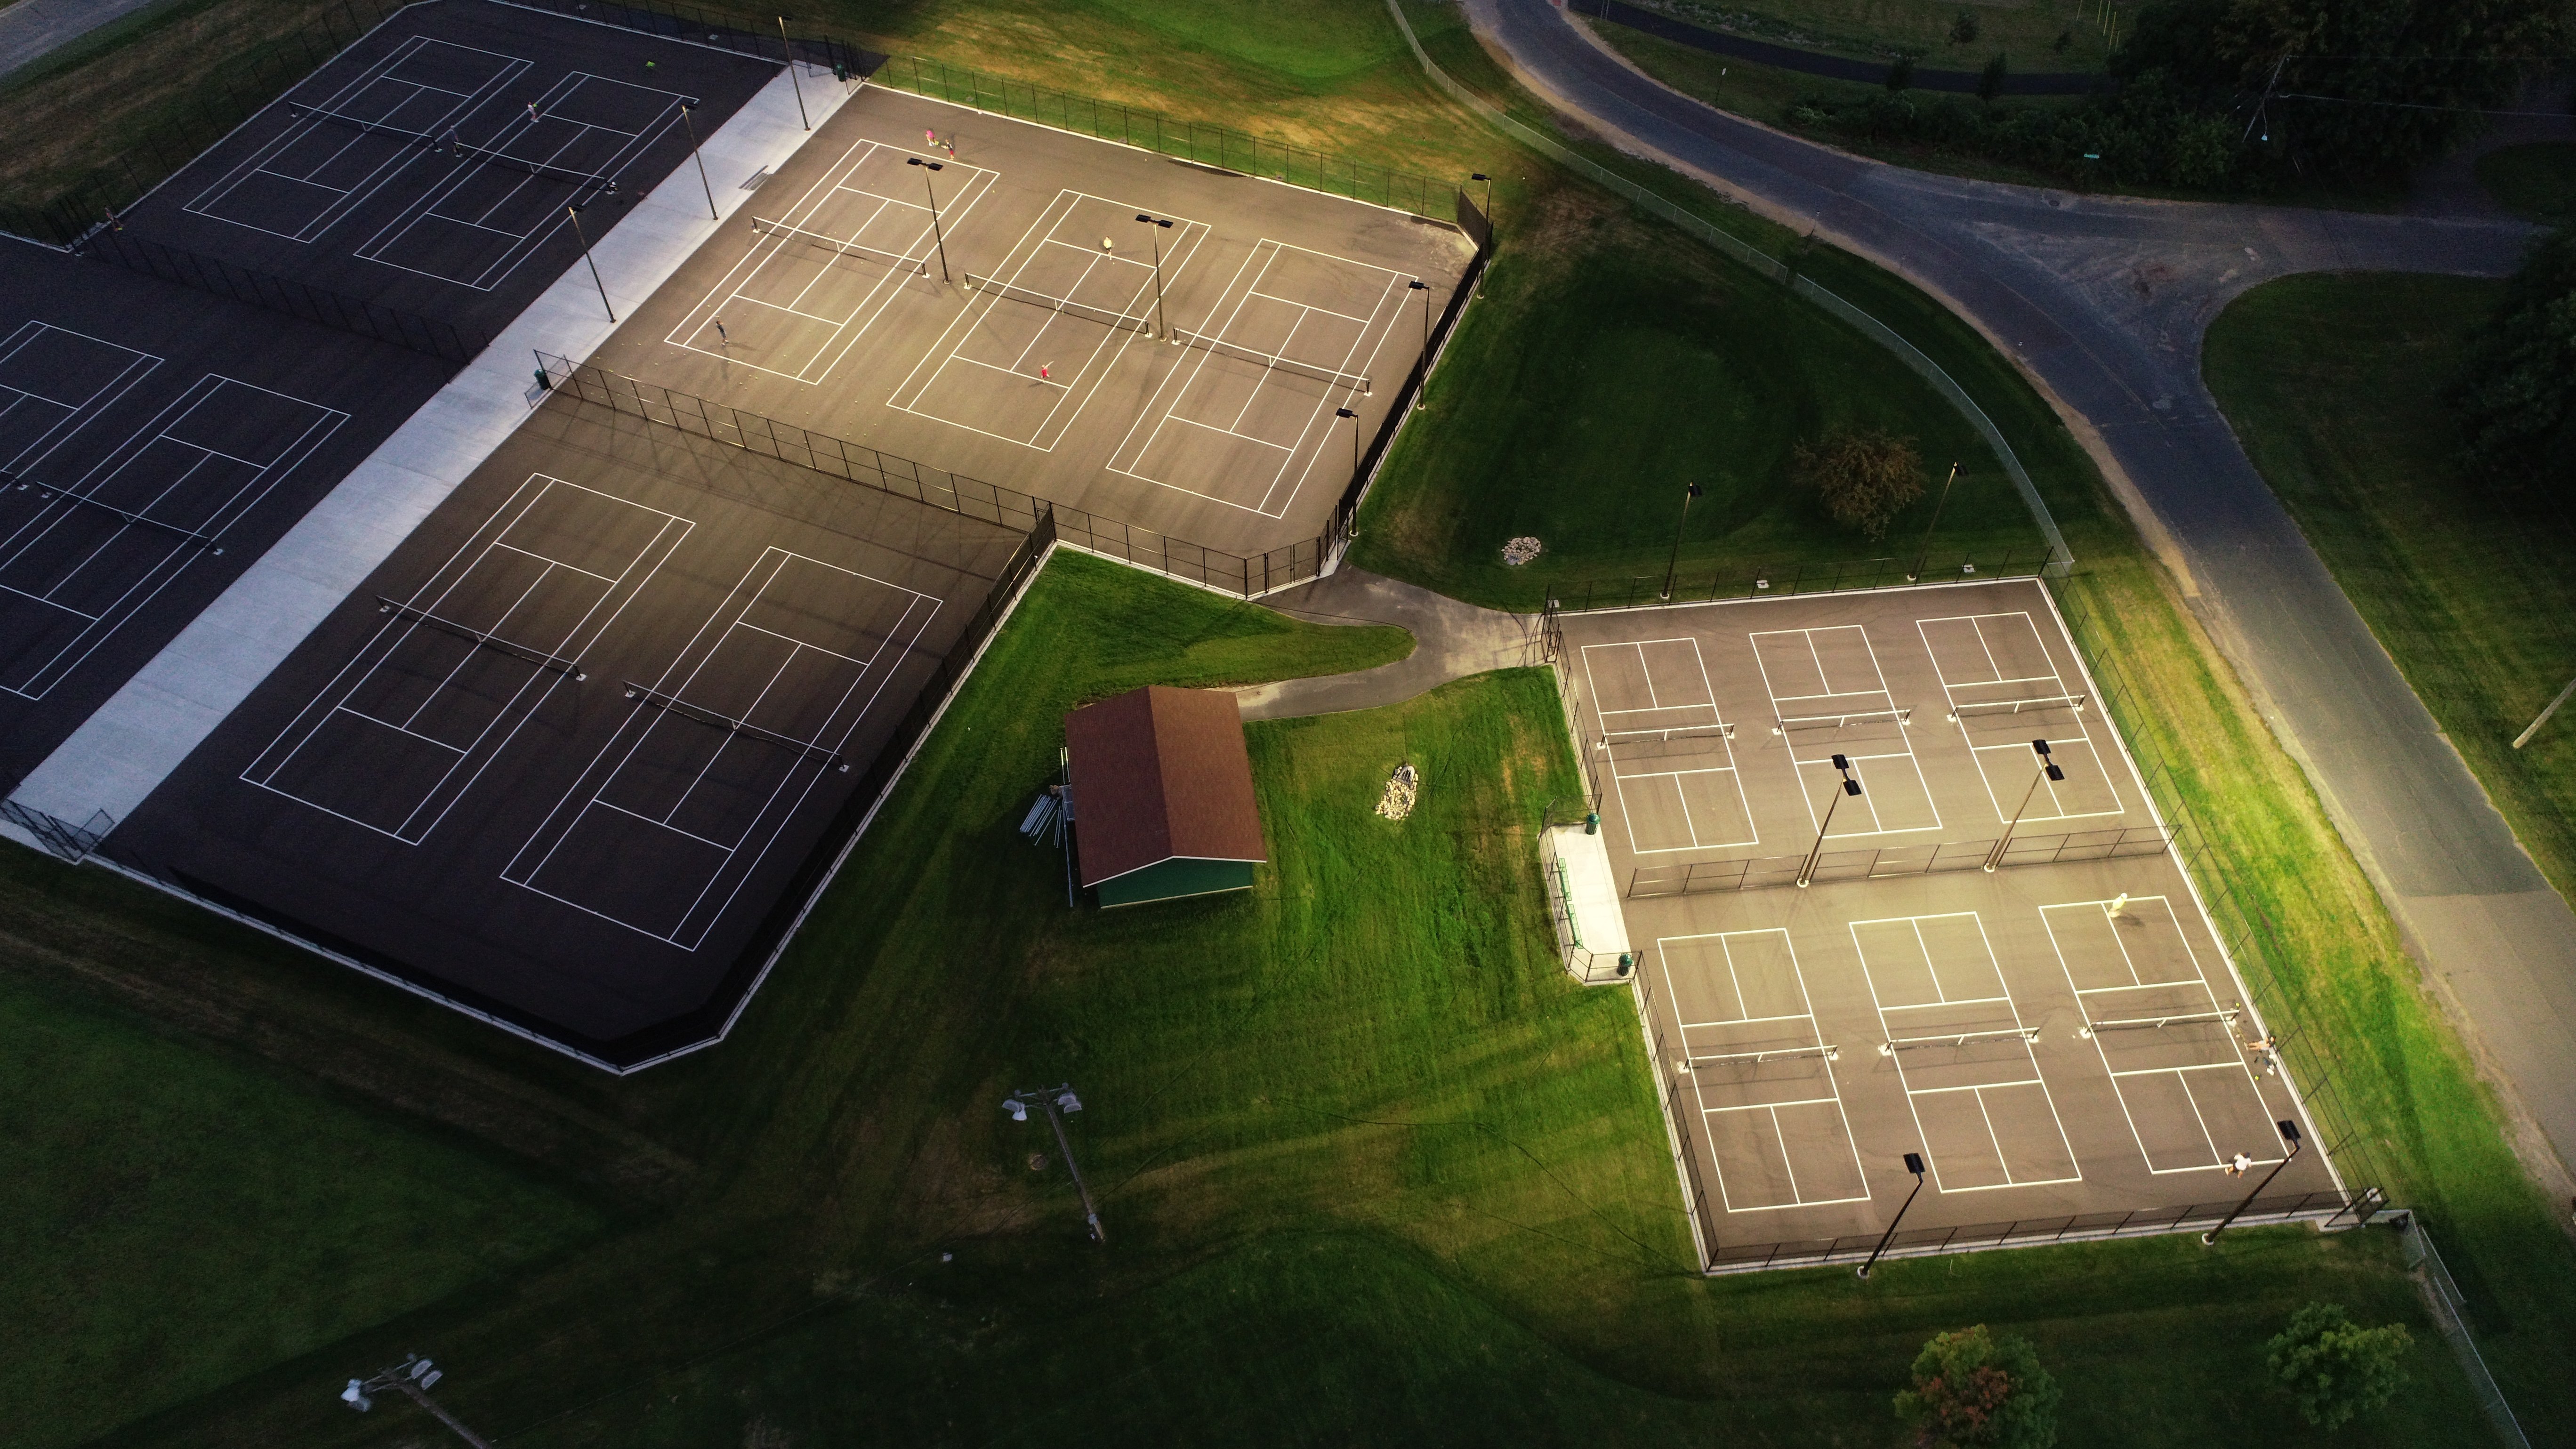 Chisago Lakes Tennis Courts - 3